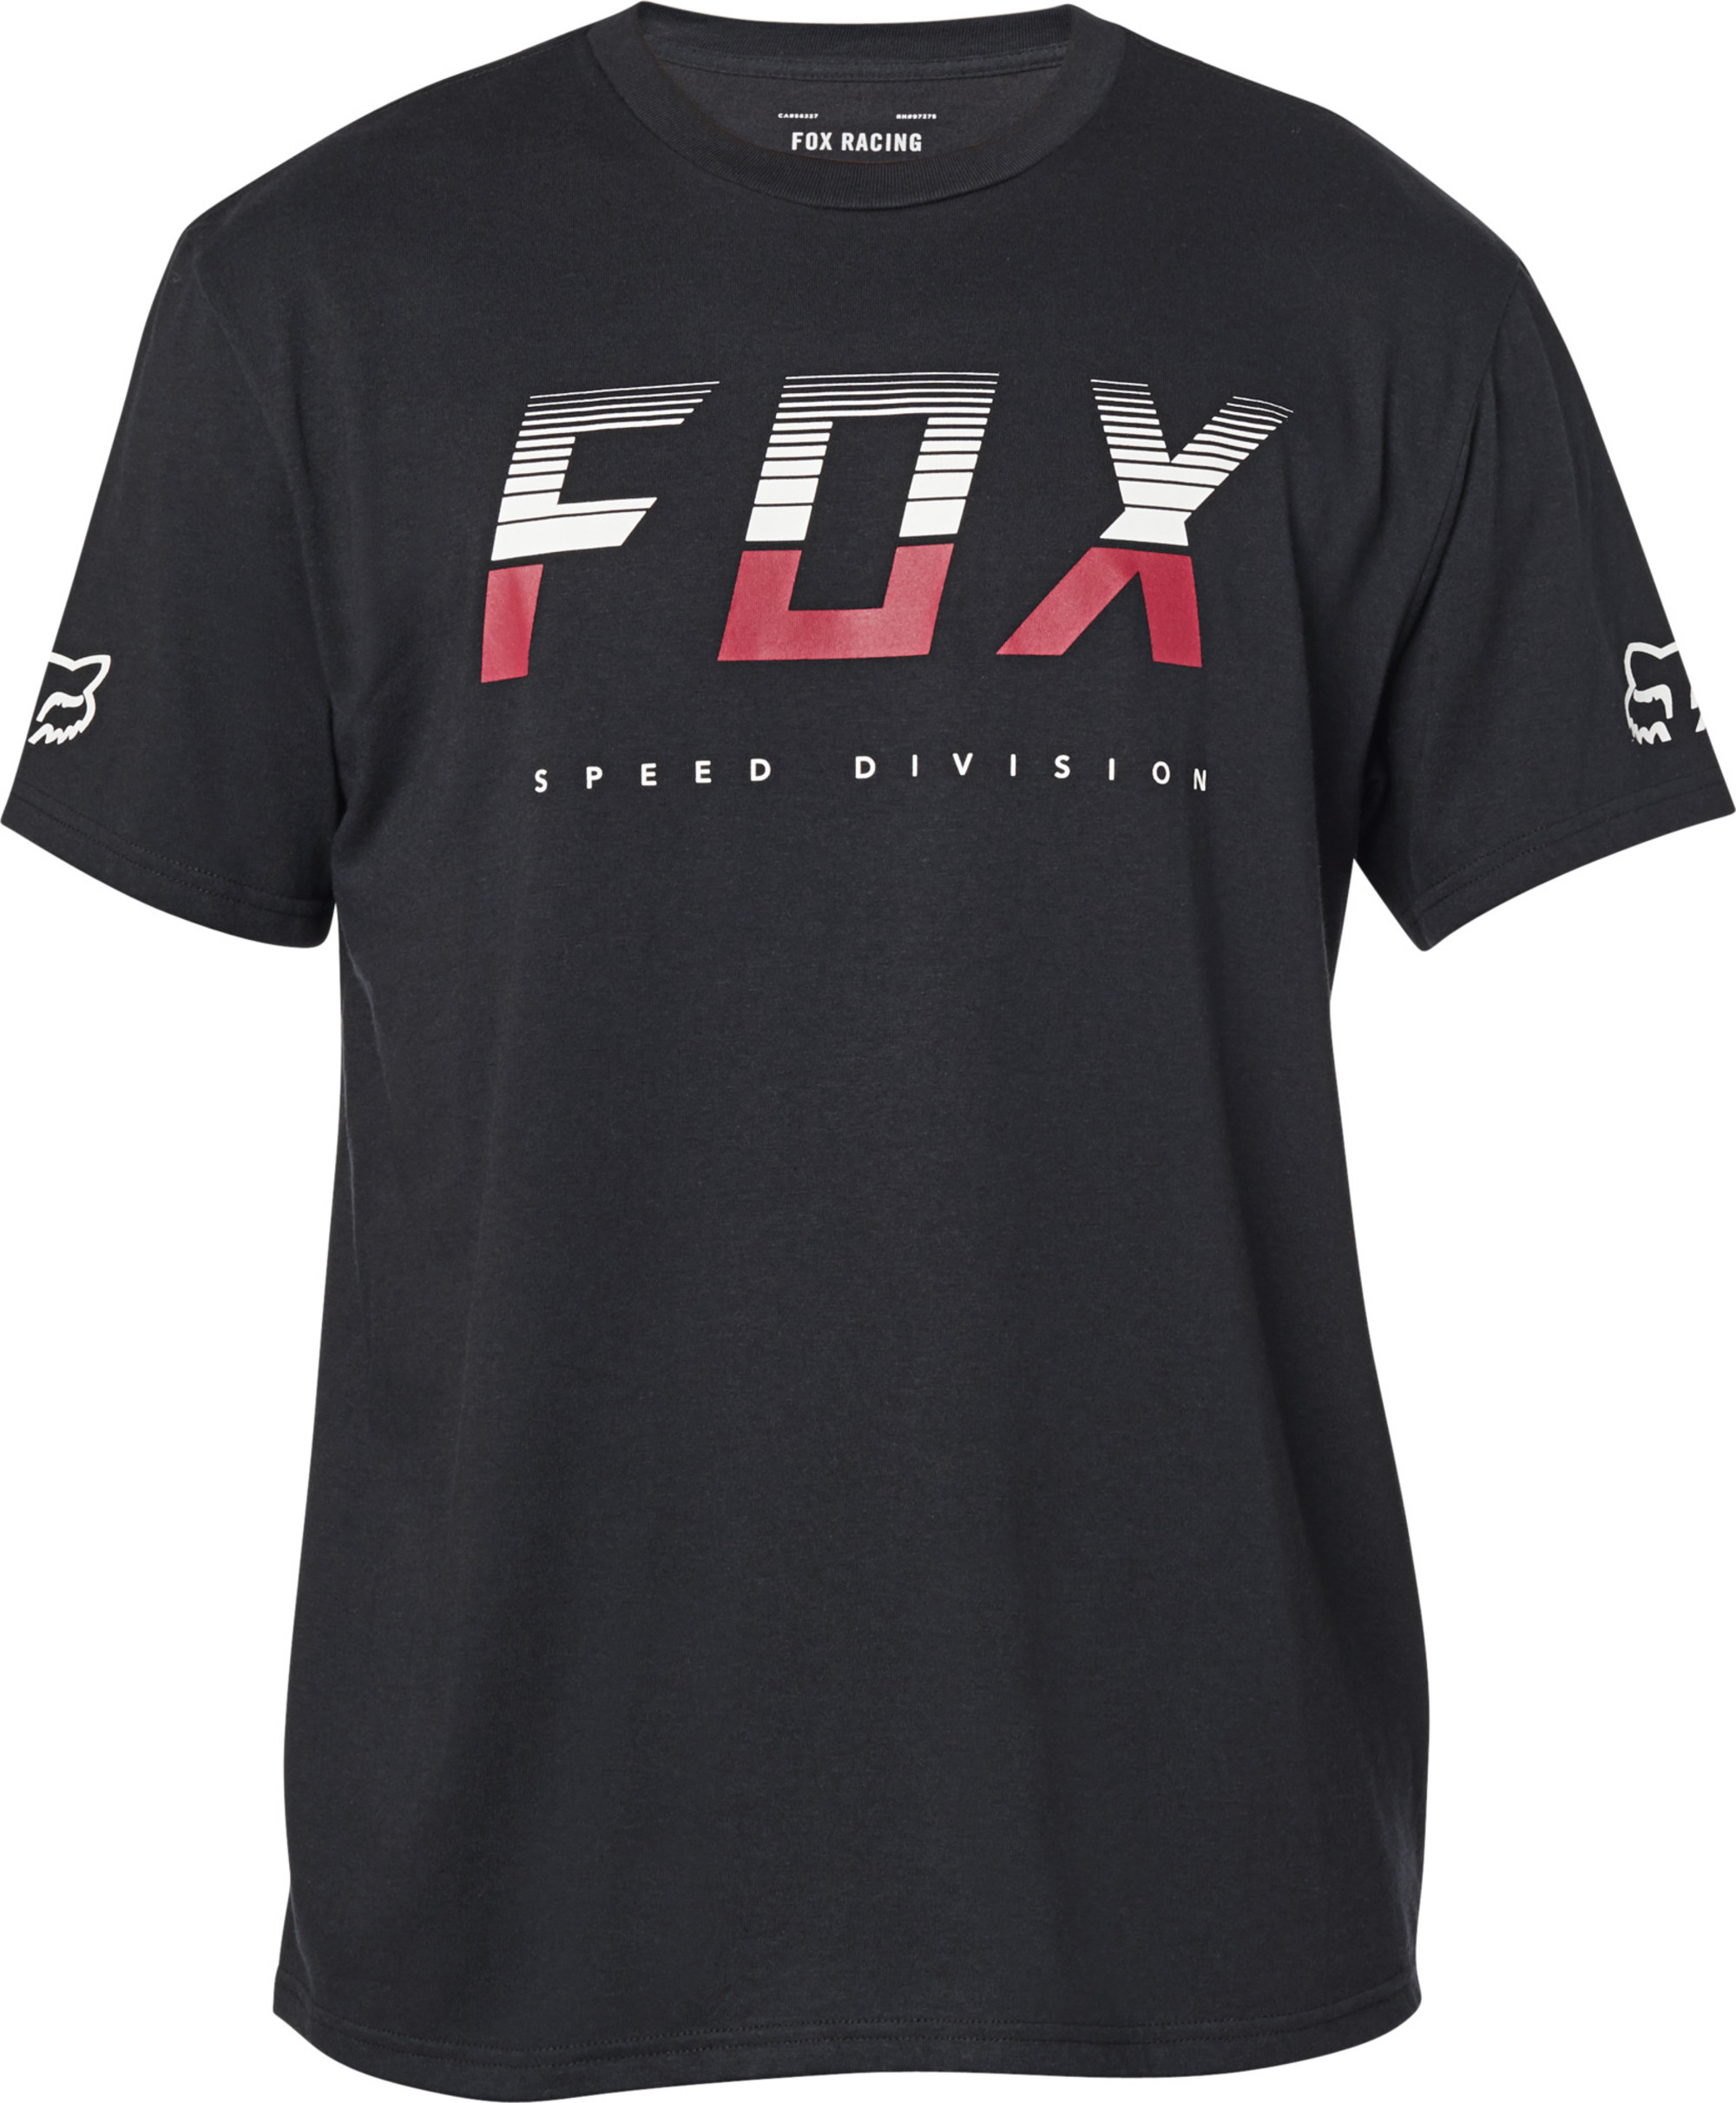 fox racing t-shirt shirts for men end of the line